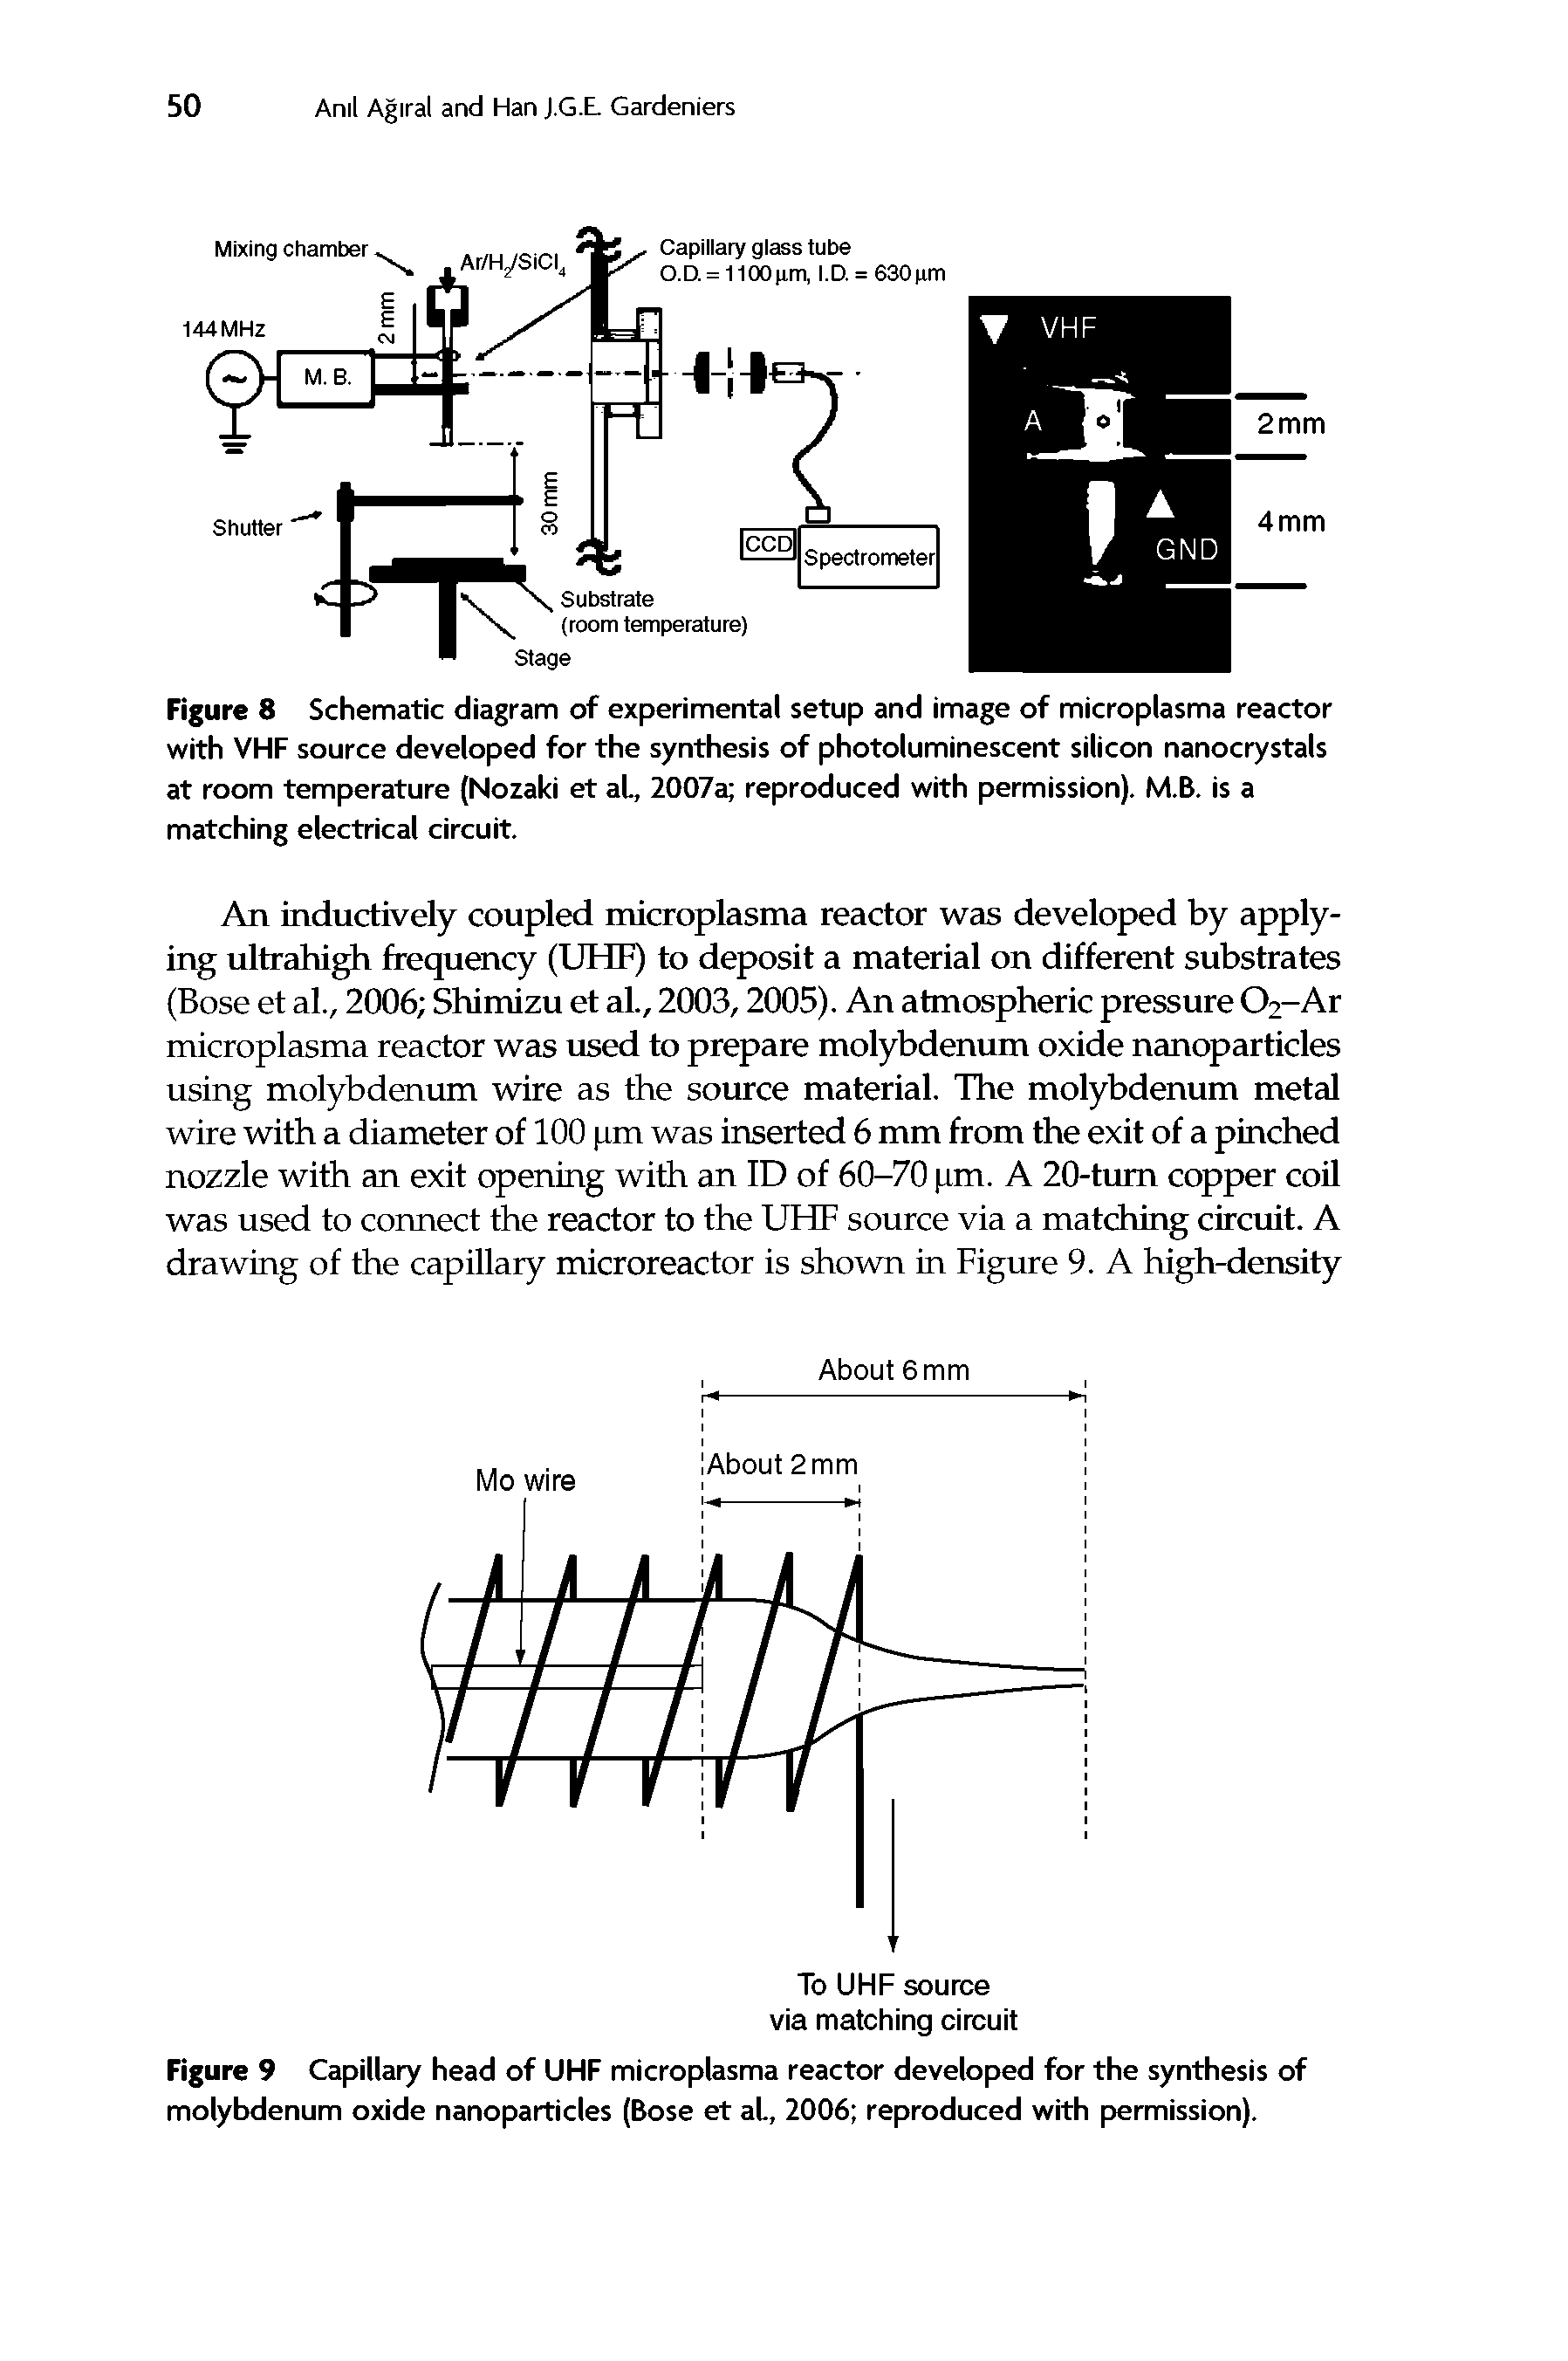 Figure 8 Schematic diagram of experimental setup and image of microplasma reactor with VHF source developed for the synthesis of photoluminescent silicon nanocrystals at room temperature (Nozaki et al, 2007a reproduced with permission). M.B. is a matching electrical circuit.